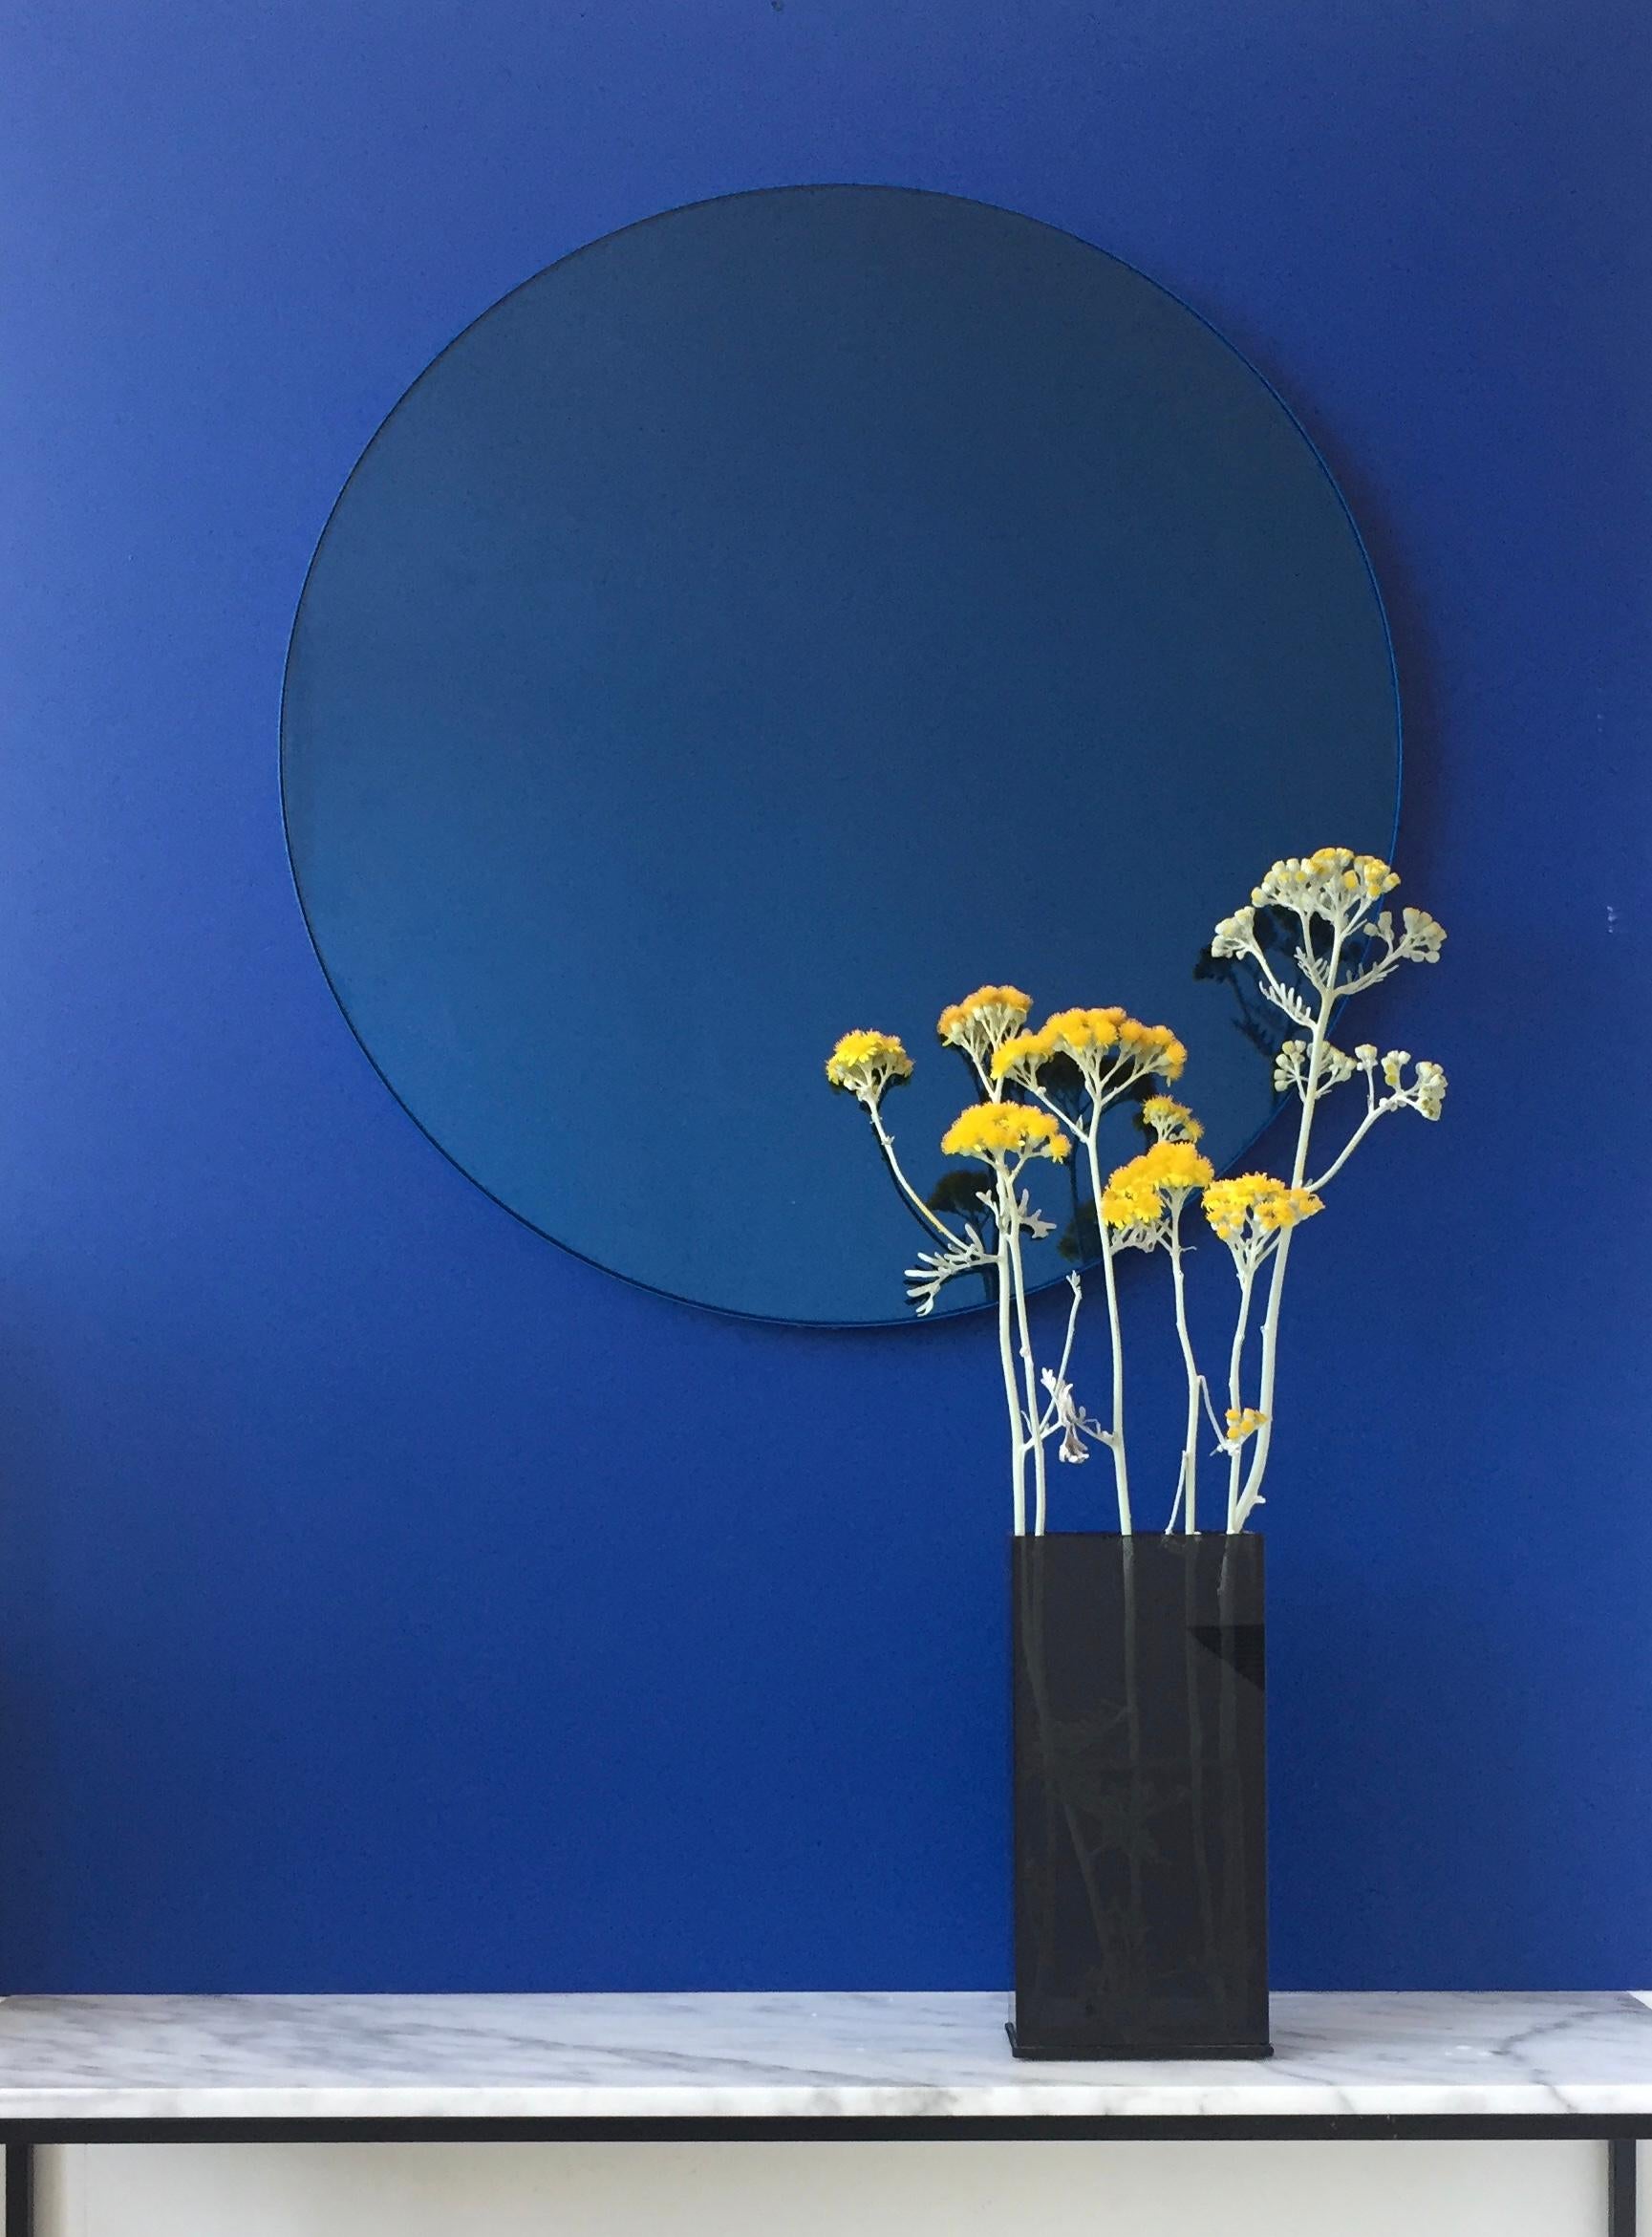 Aluminum Orbis Blue Tinted Circular Mirror with a Contemporary Blue Frame, Bespoke, XL For Sale